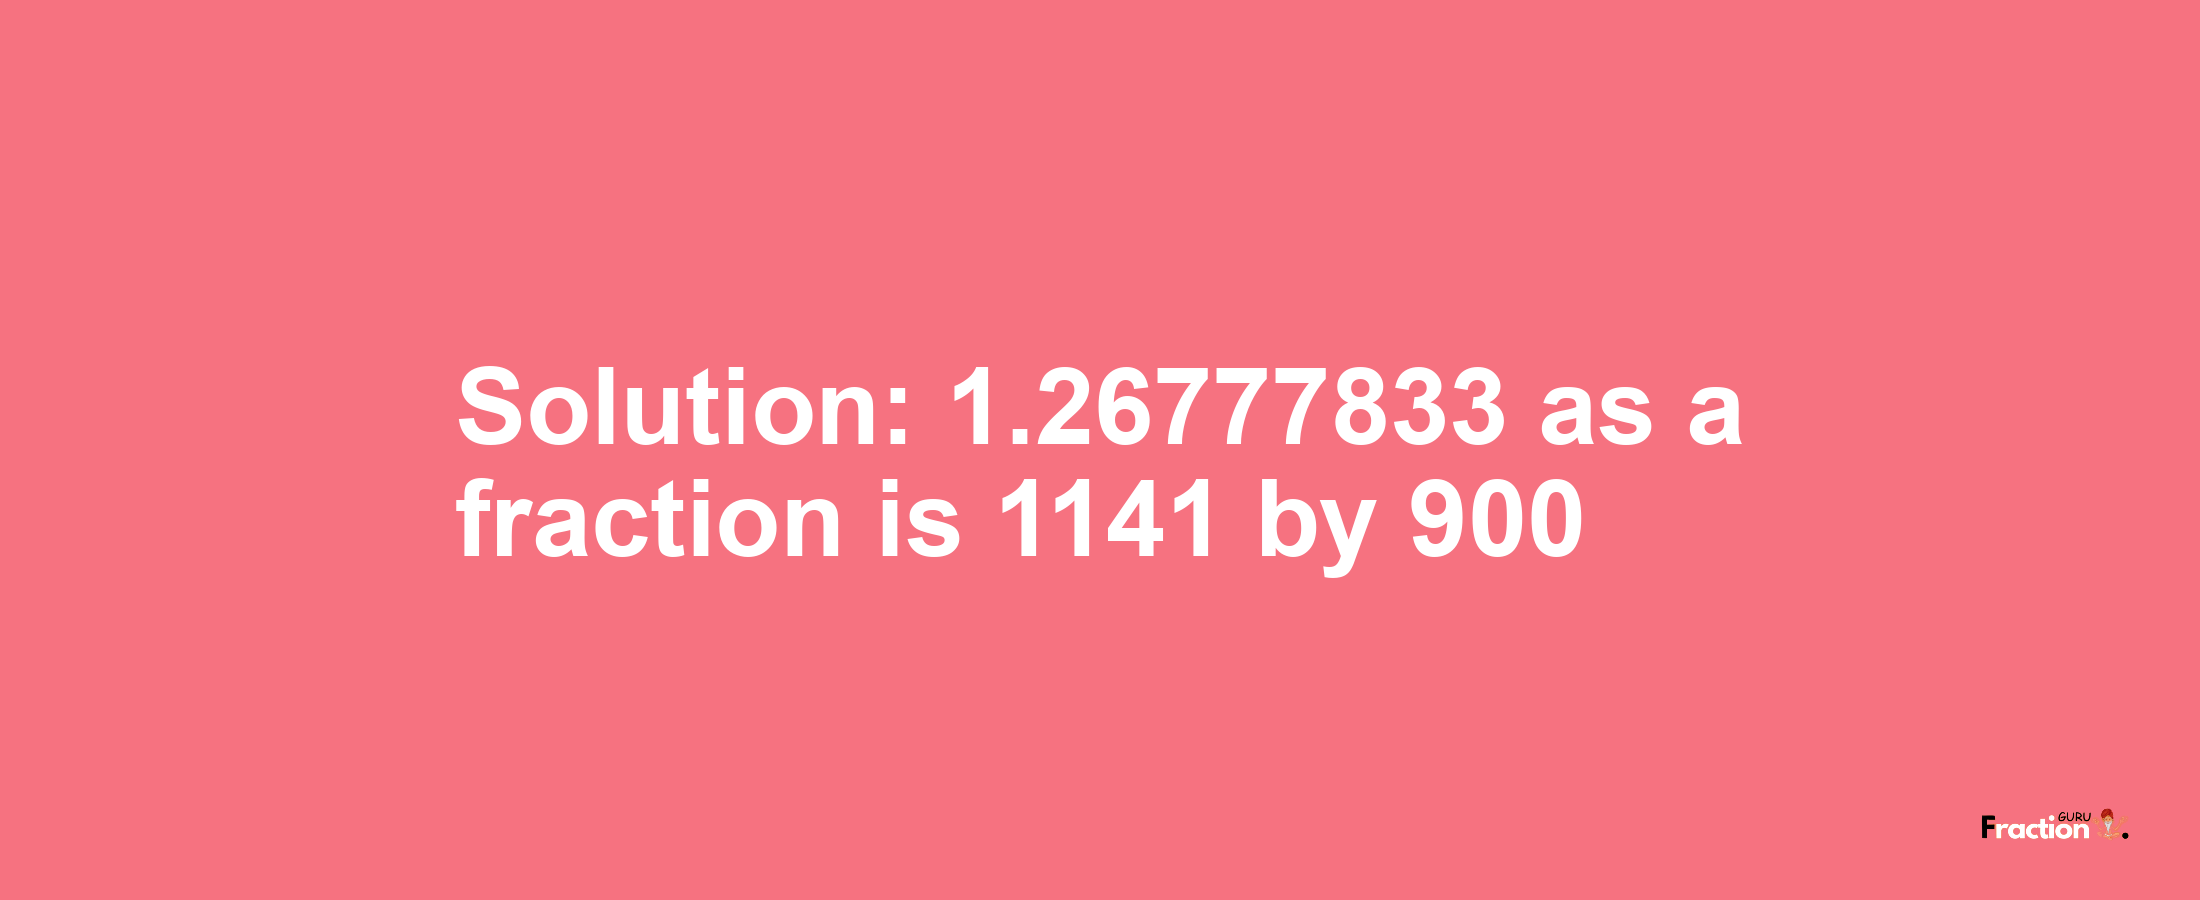 Solution:1.26777833 as a fraction is 1141/900